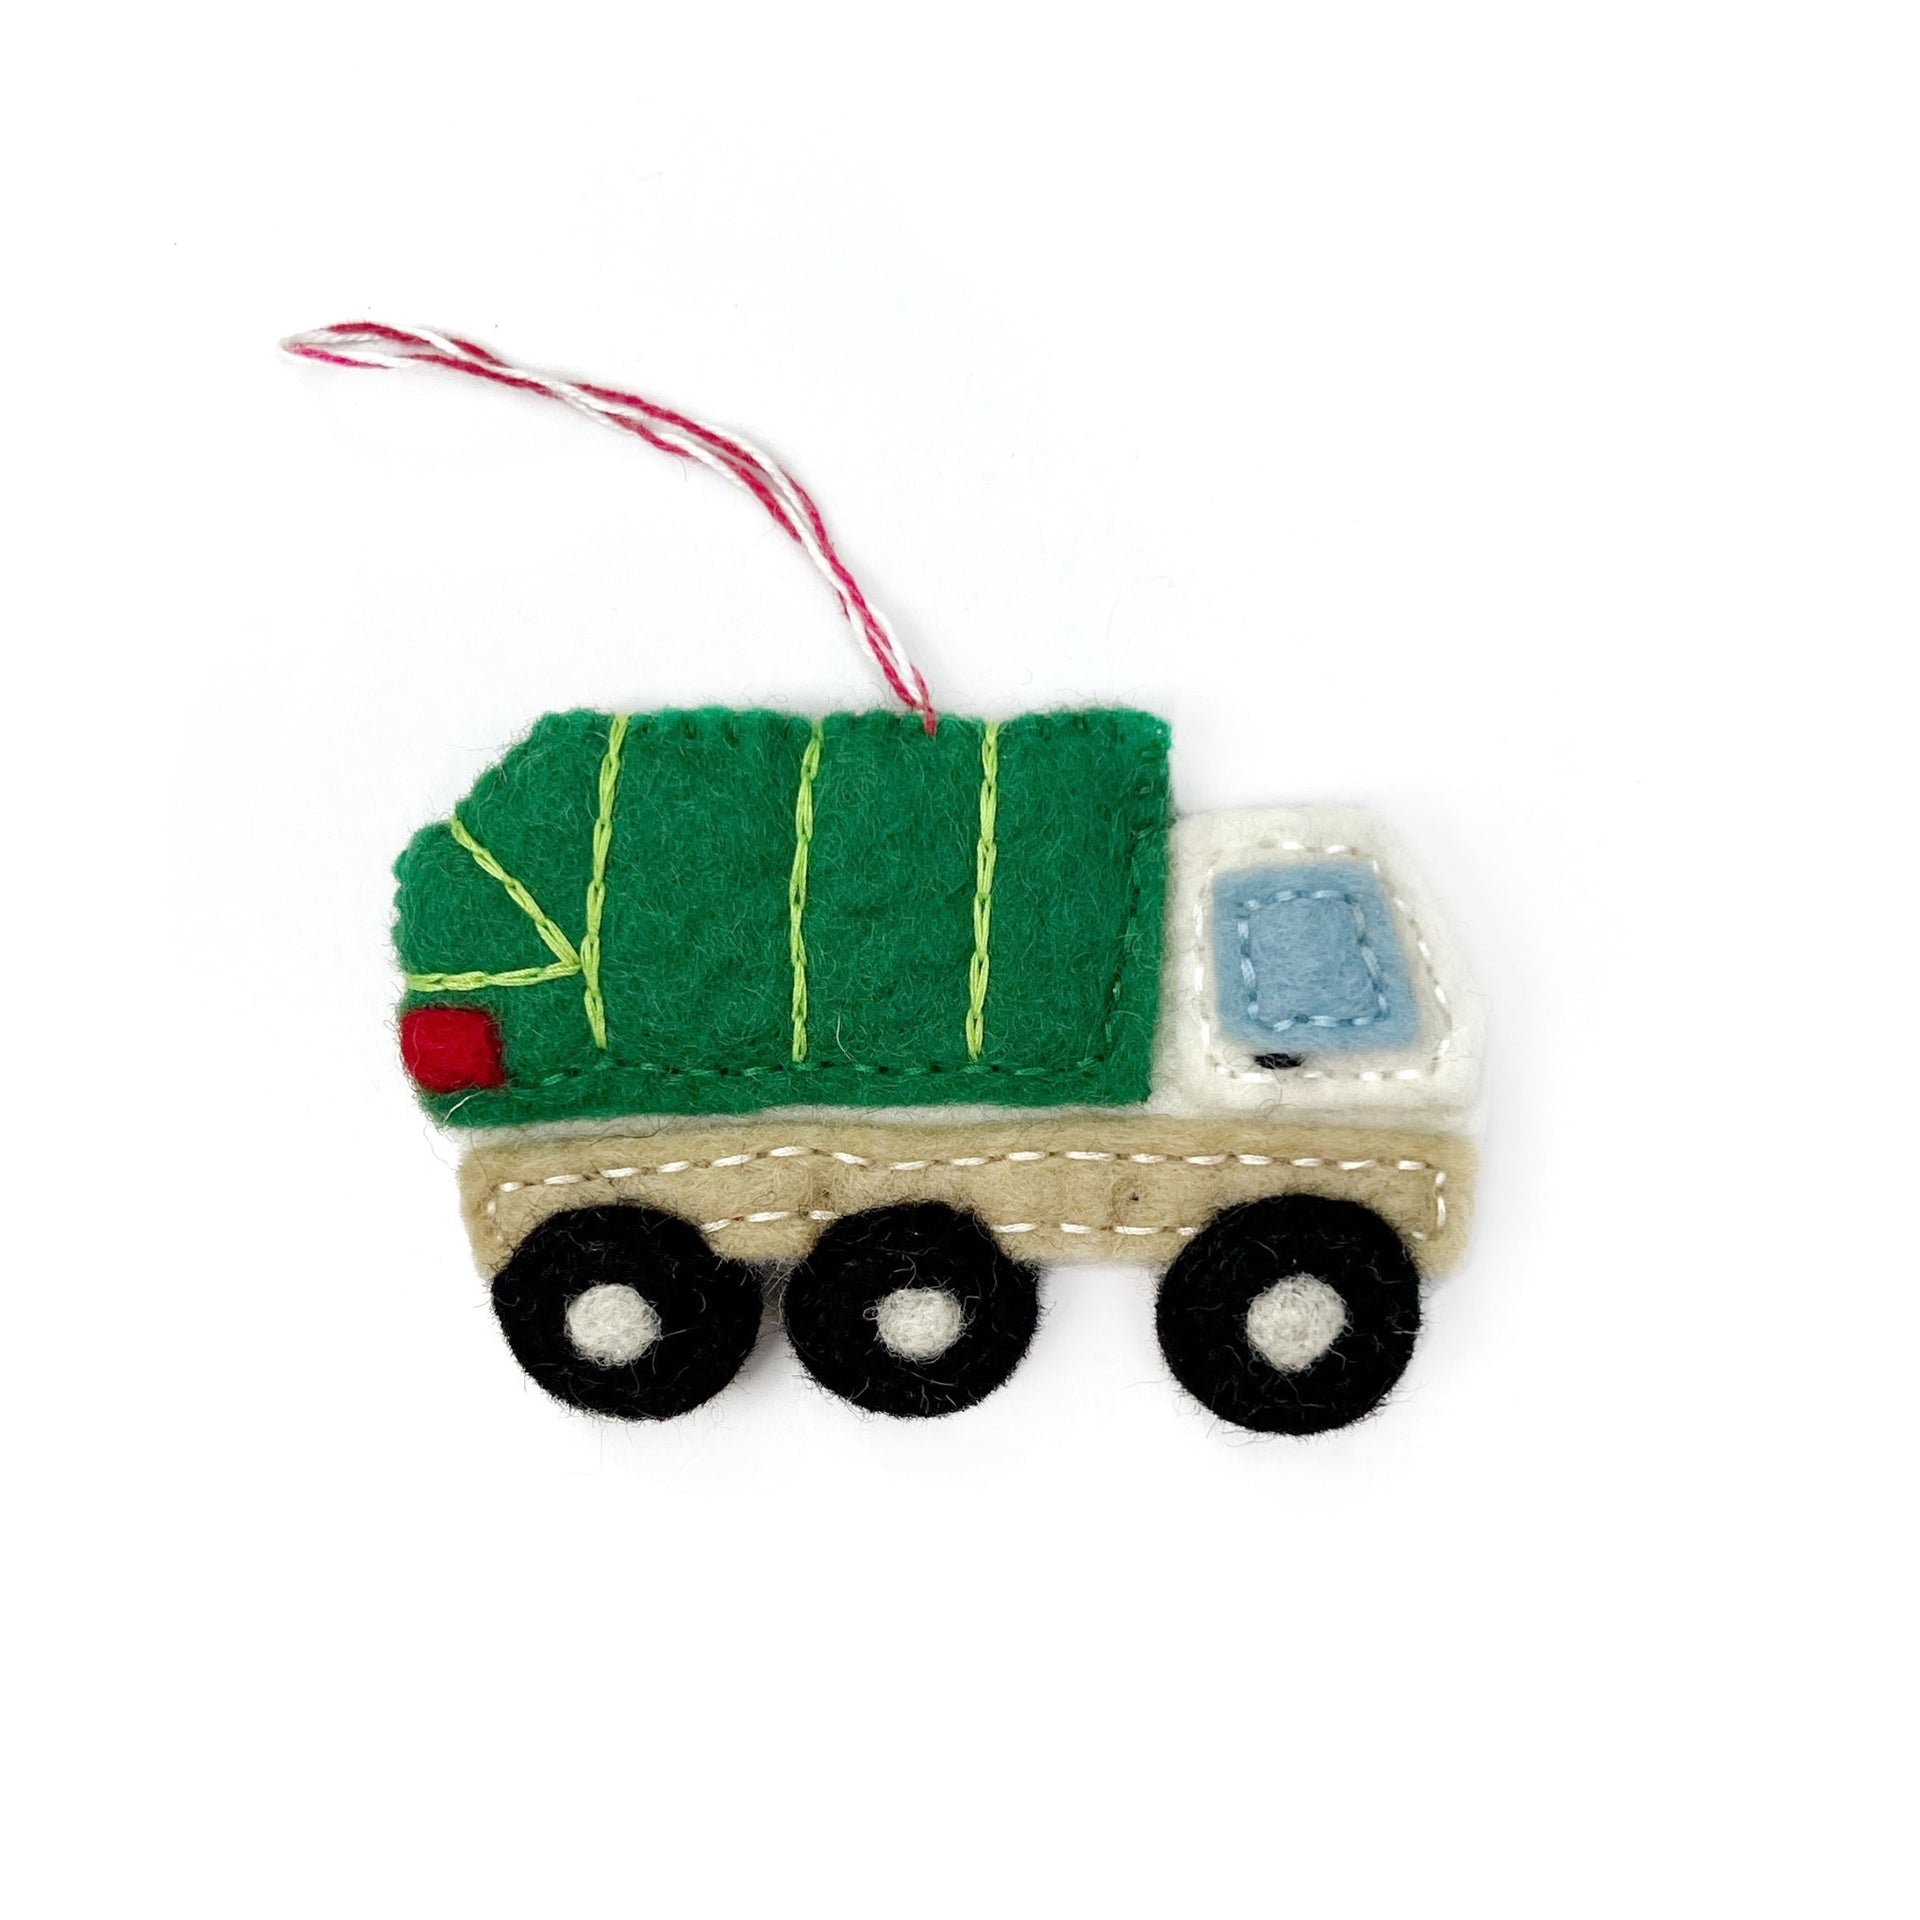 Ornaments 4 Orphans felt wool garbage truck Christmas ornament handmade and fair trade from Nepal